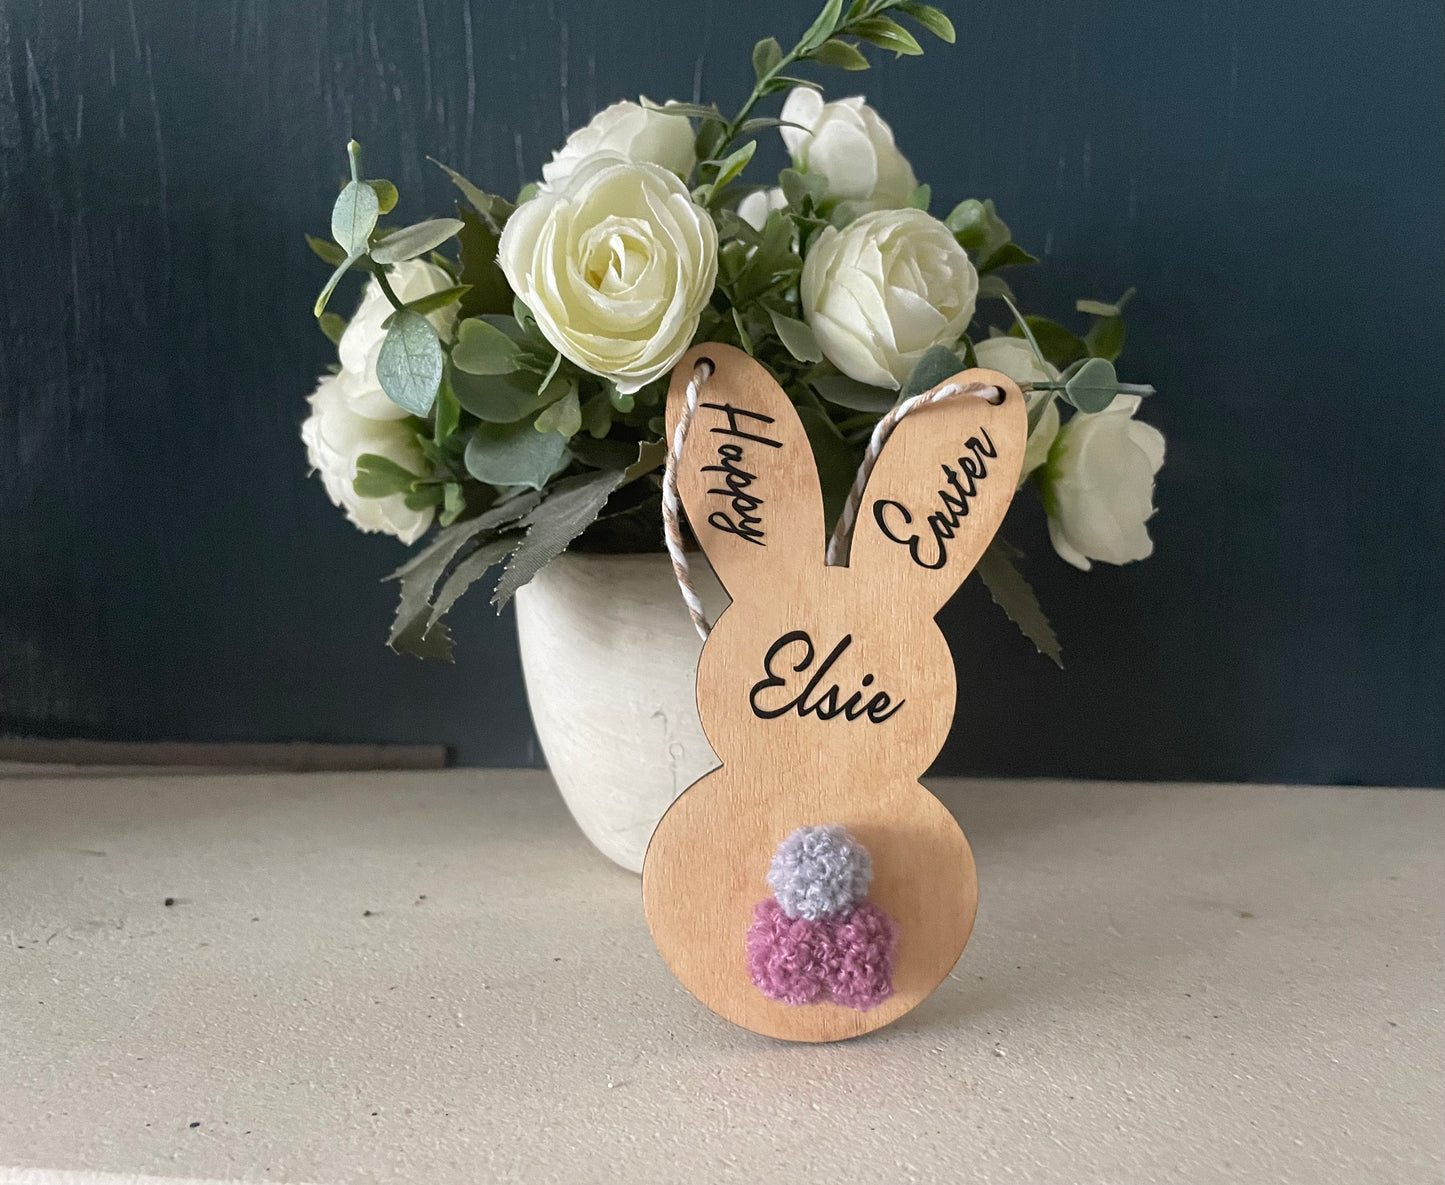 Personalised Wooden Happy Easter Bunny for Kids, Customised Hanging Easter Gift with Coloured Pom-Pom Tail, Custom Woodland Theme Room Decor